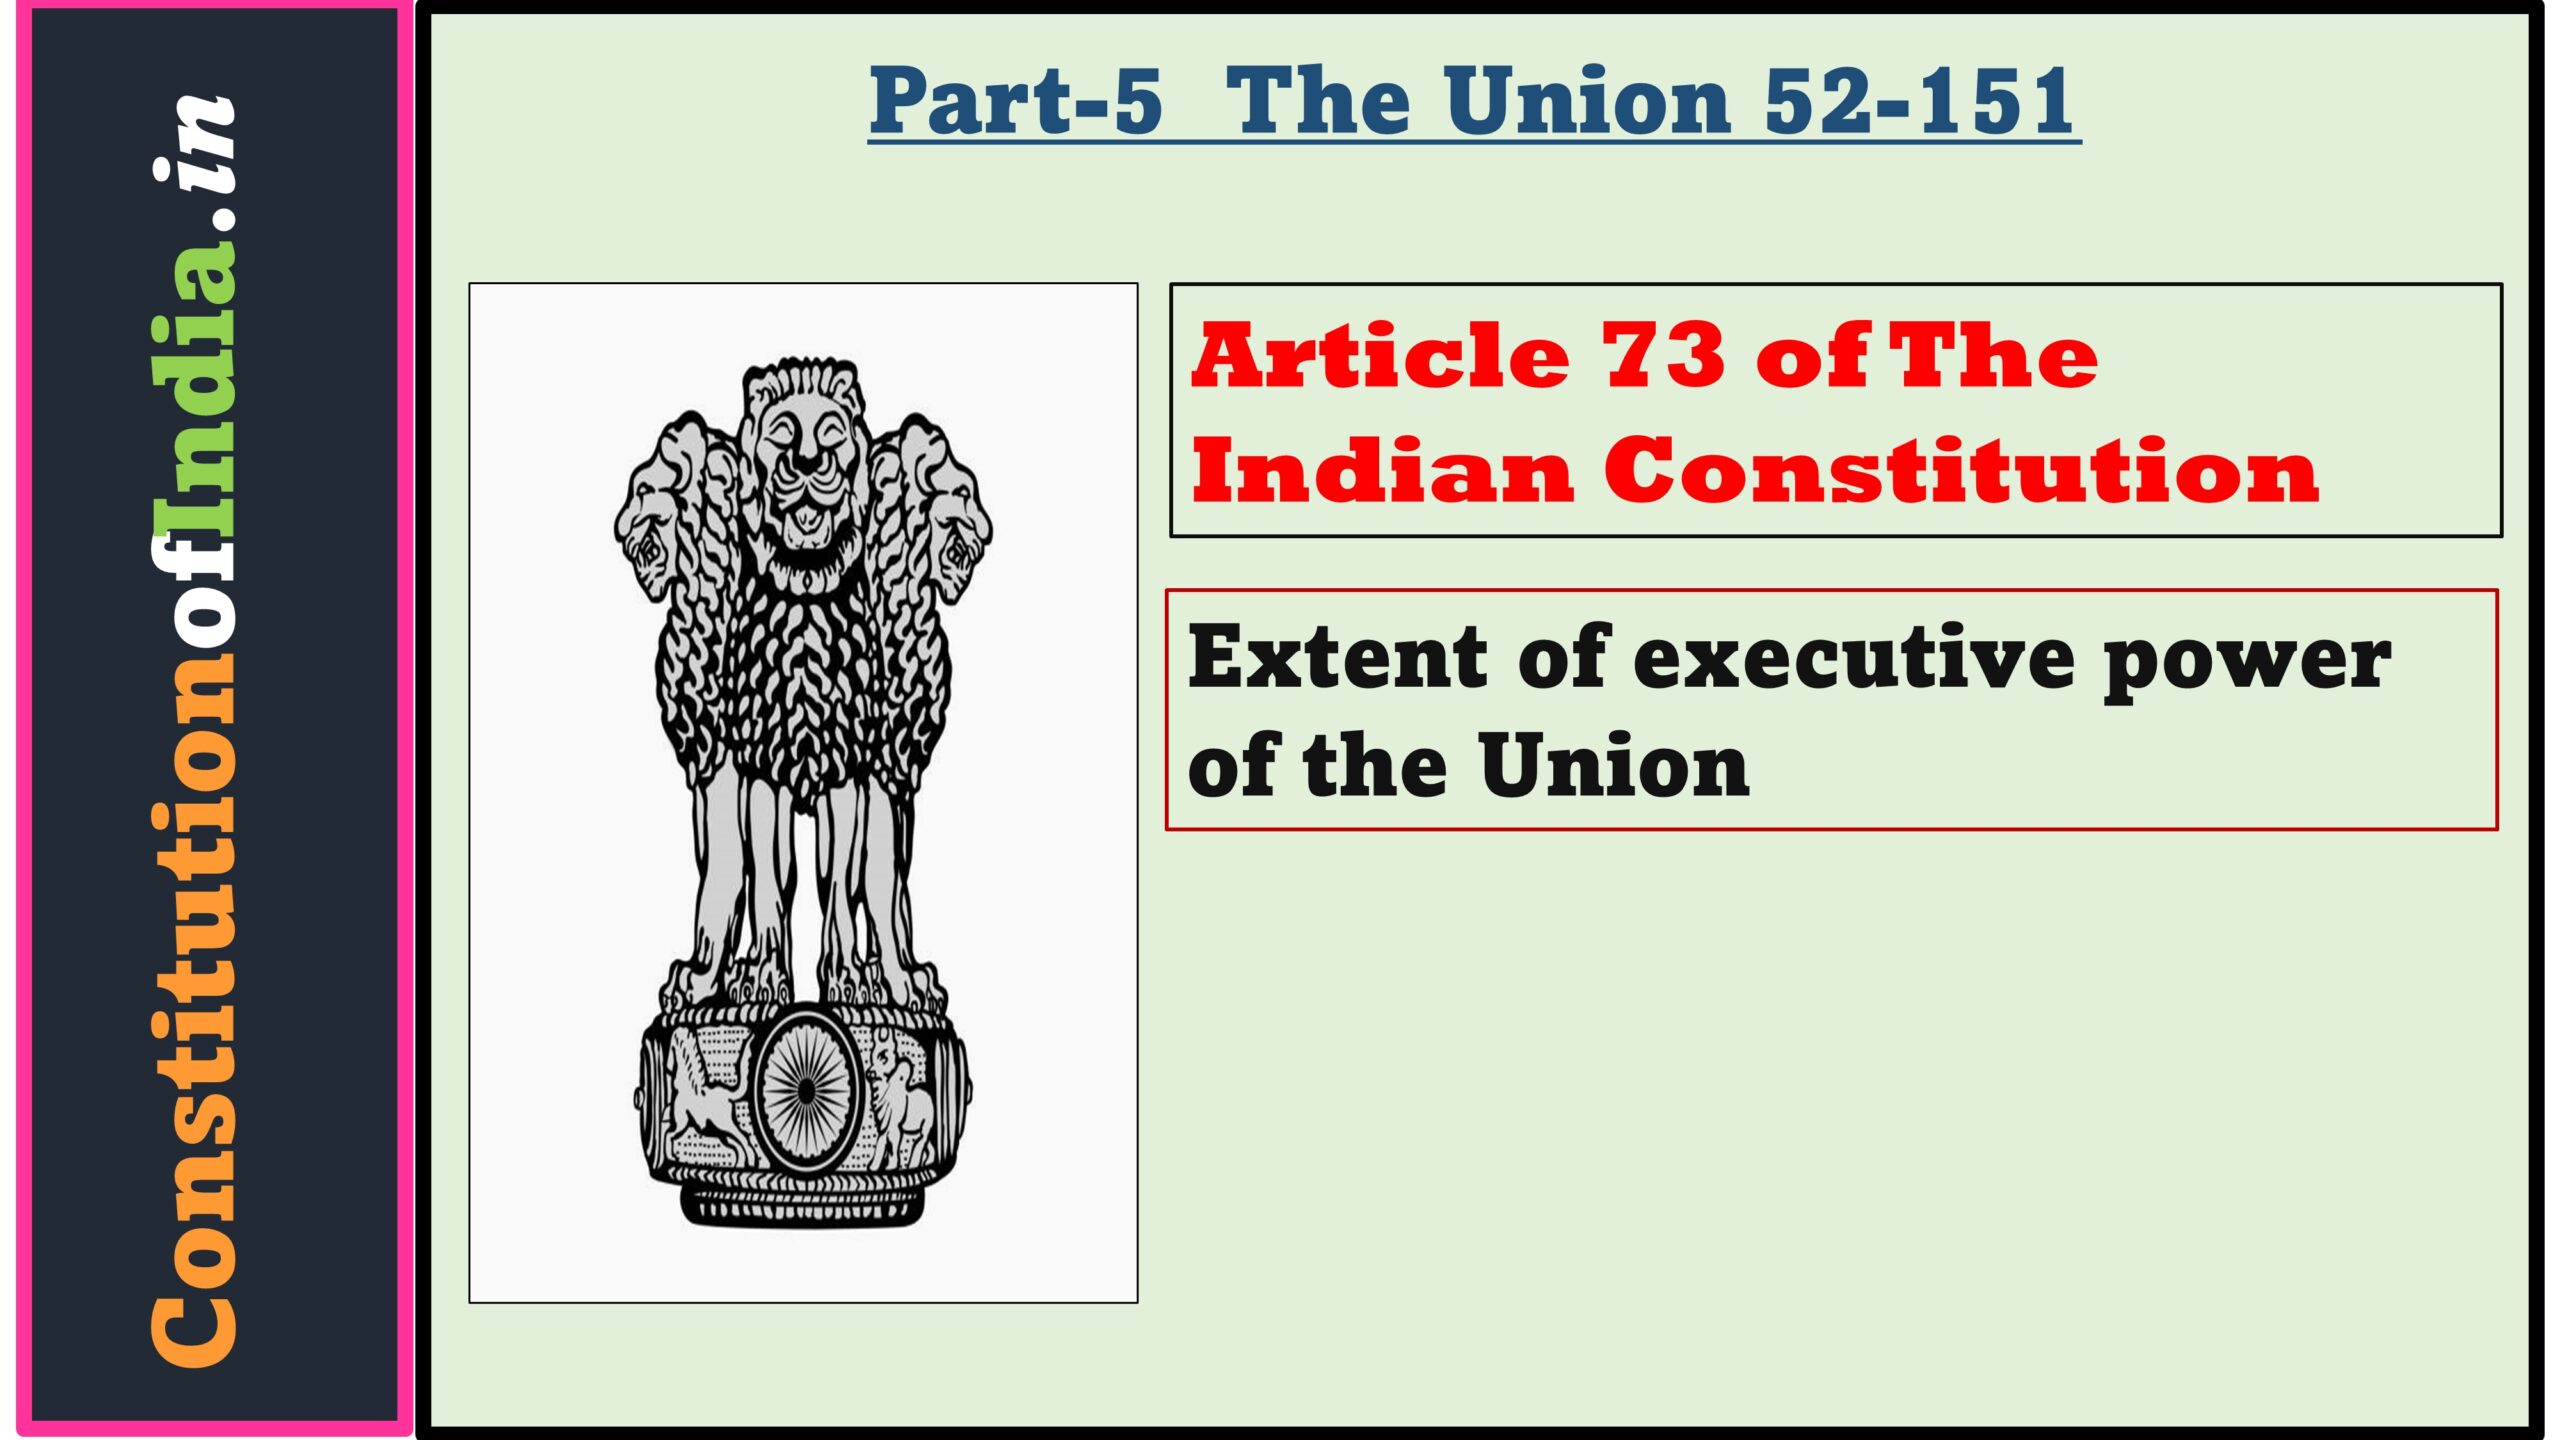 Article 73 of Indian Constitution